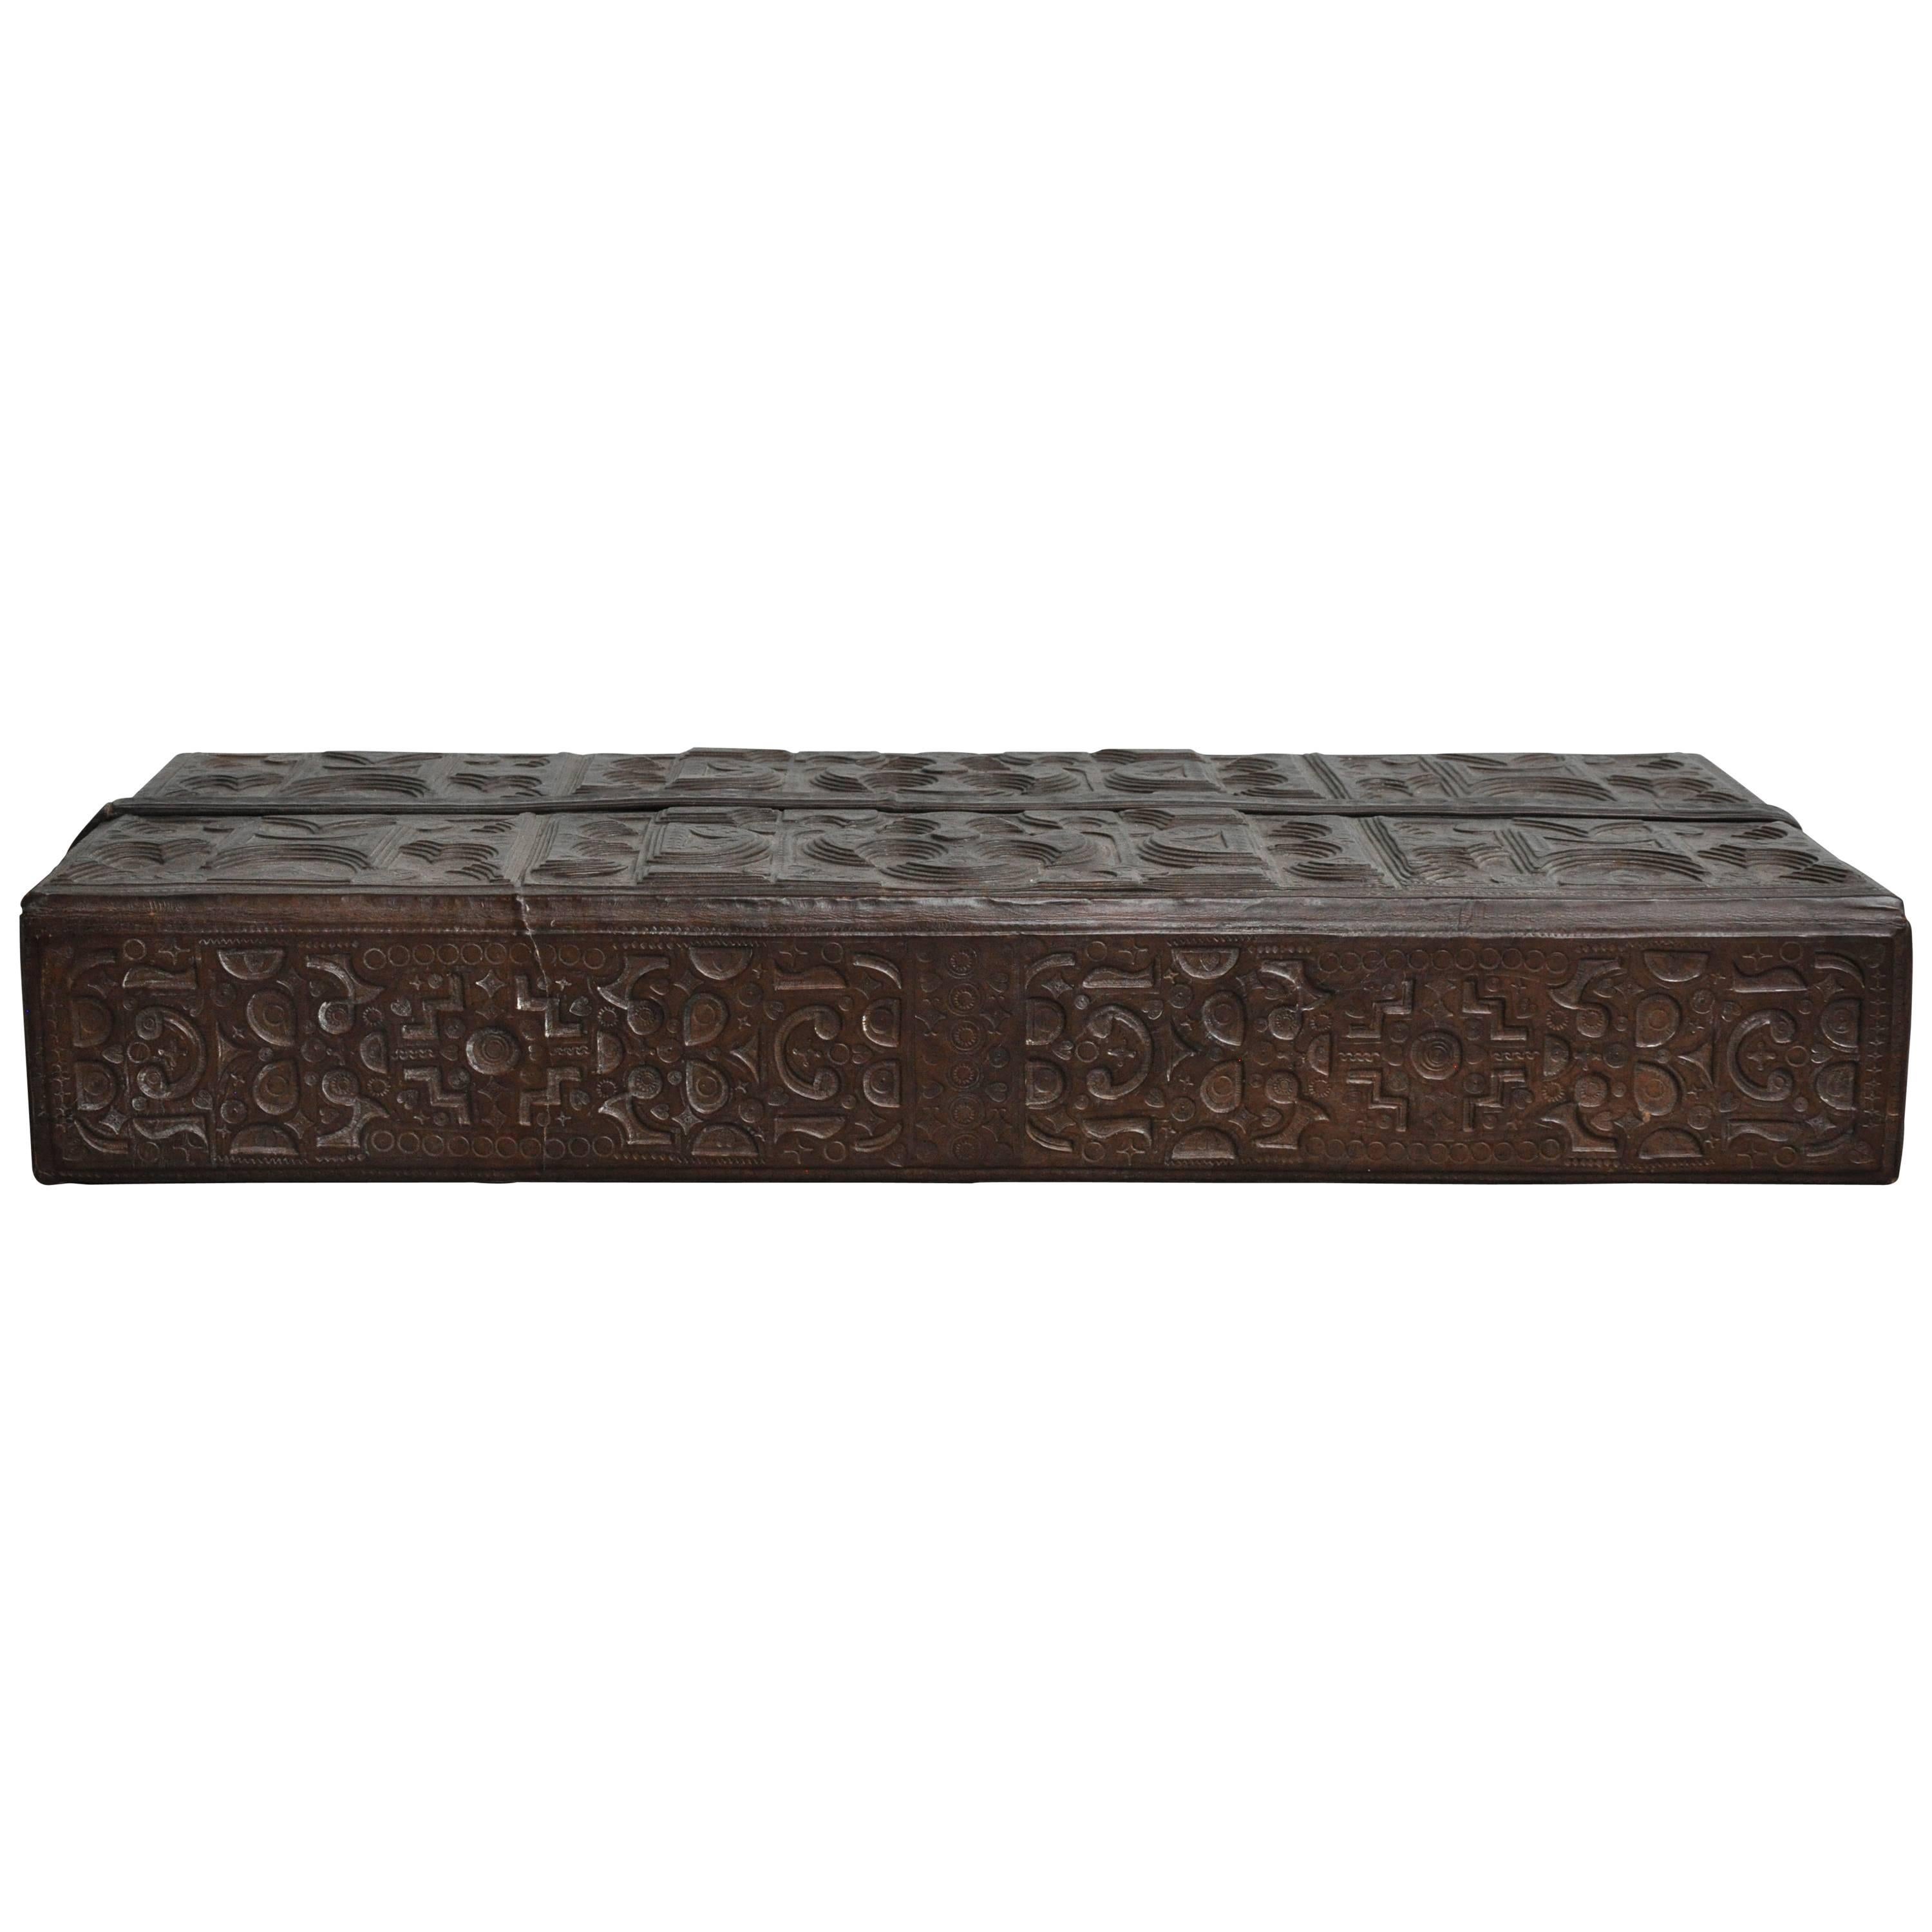 Early 20th Century Tooled Leather Box from Morocco
Leather box was found in France.
The Workmanship of this piece is second to none.
Beautifully tooled and designed with classic African designs.
Opens to wooden interior with various compartments and